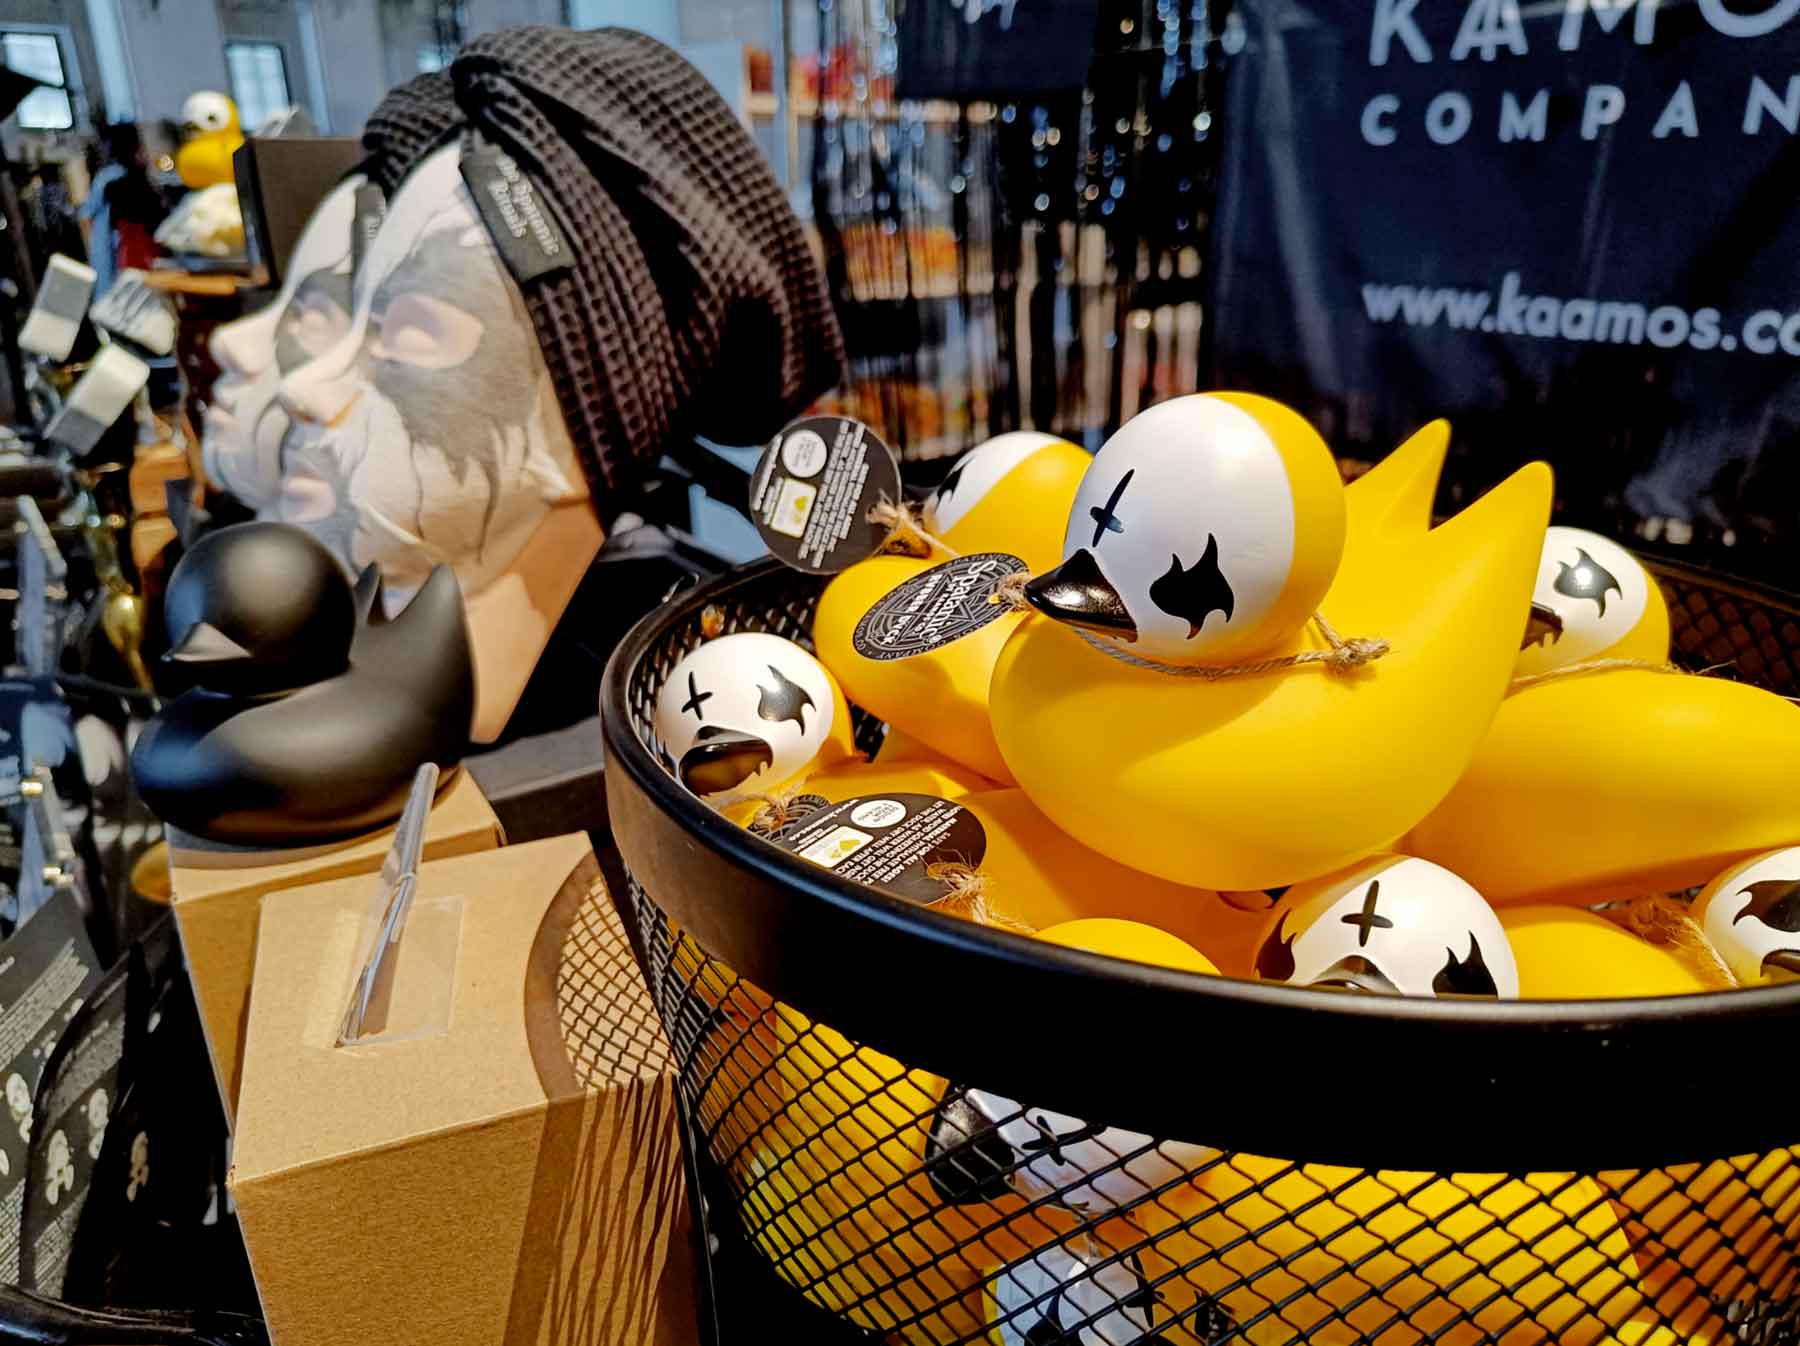 Spatanic rubber ducks with corpse paint designed by Kaamos Co